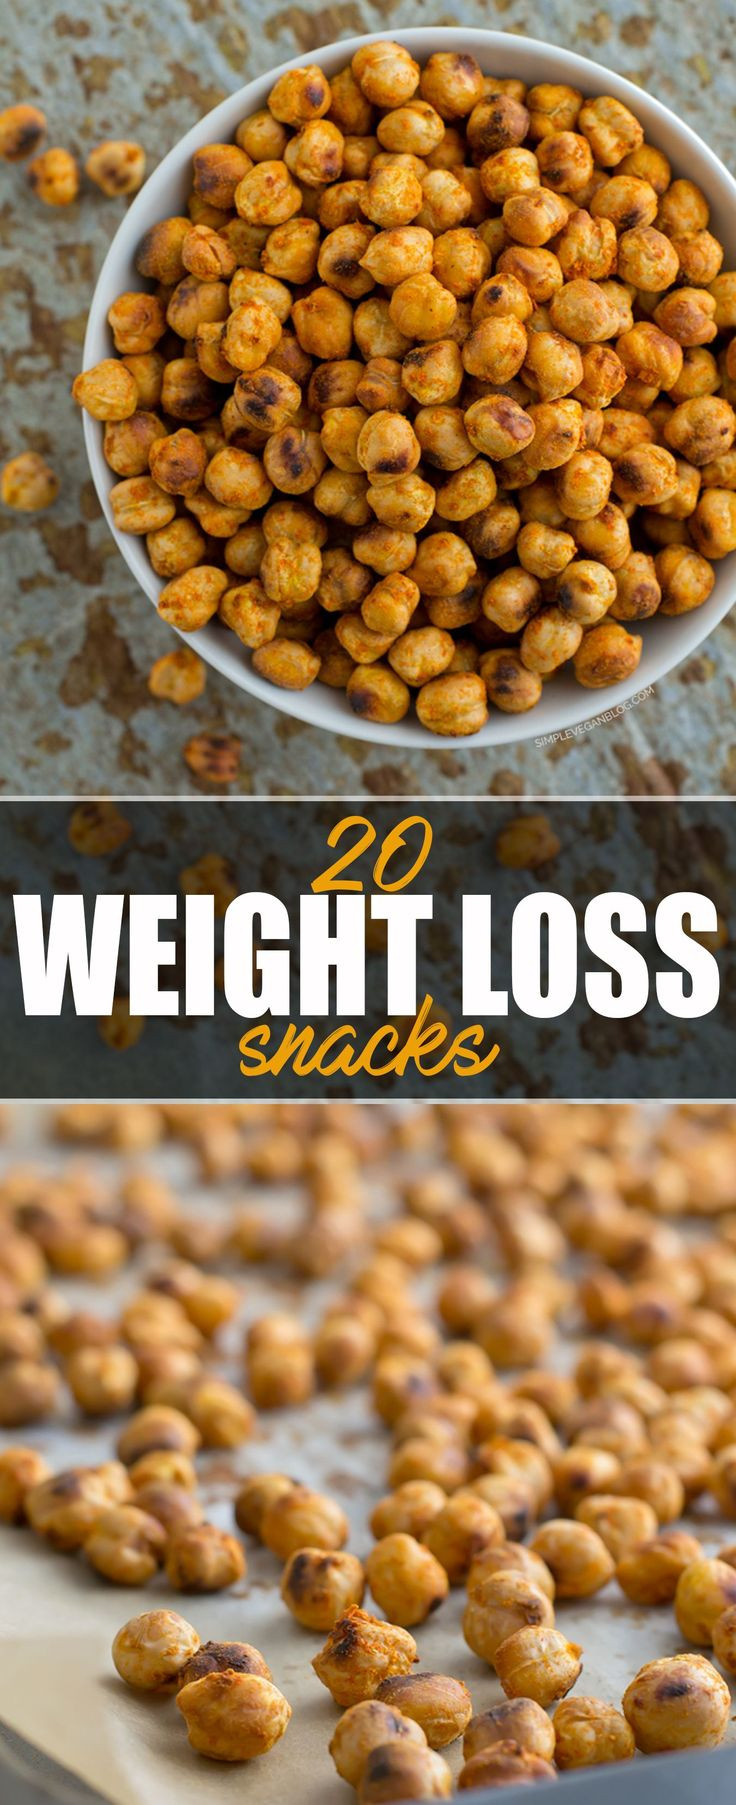 Best Healthy Snacks For Weight Loss
 20 Easy Healthy Snack Ideas The Best Snacks For Weight